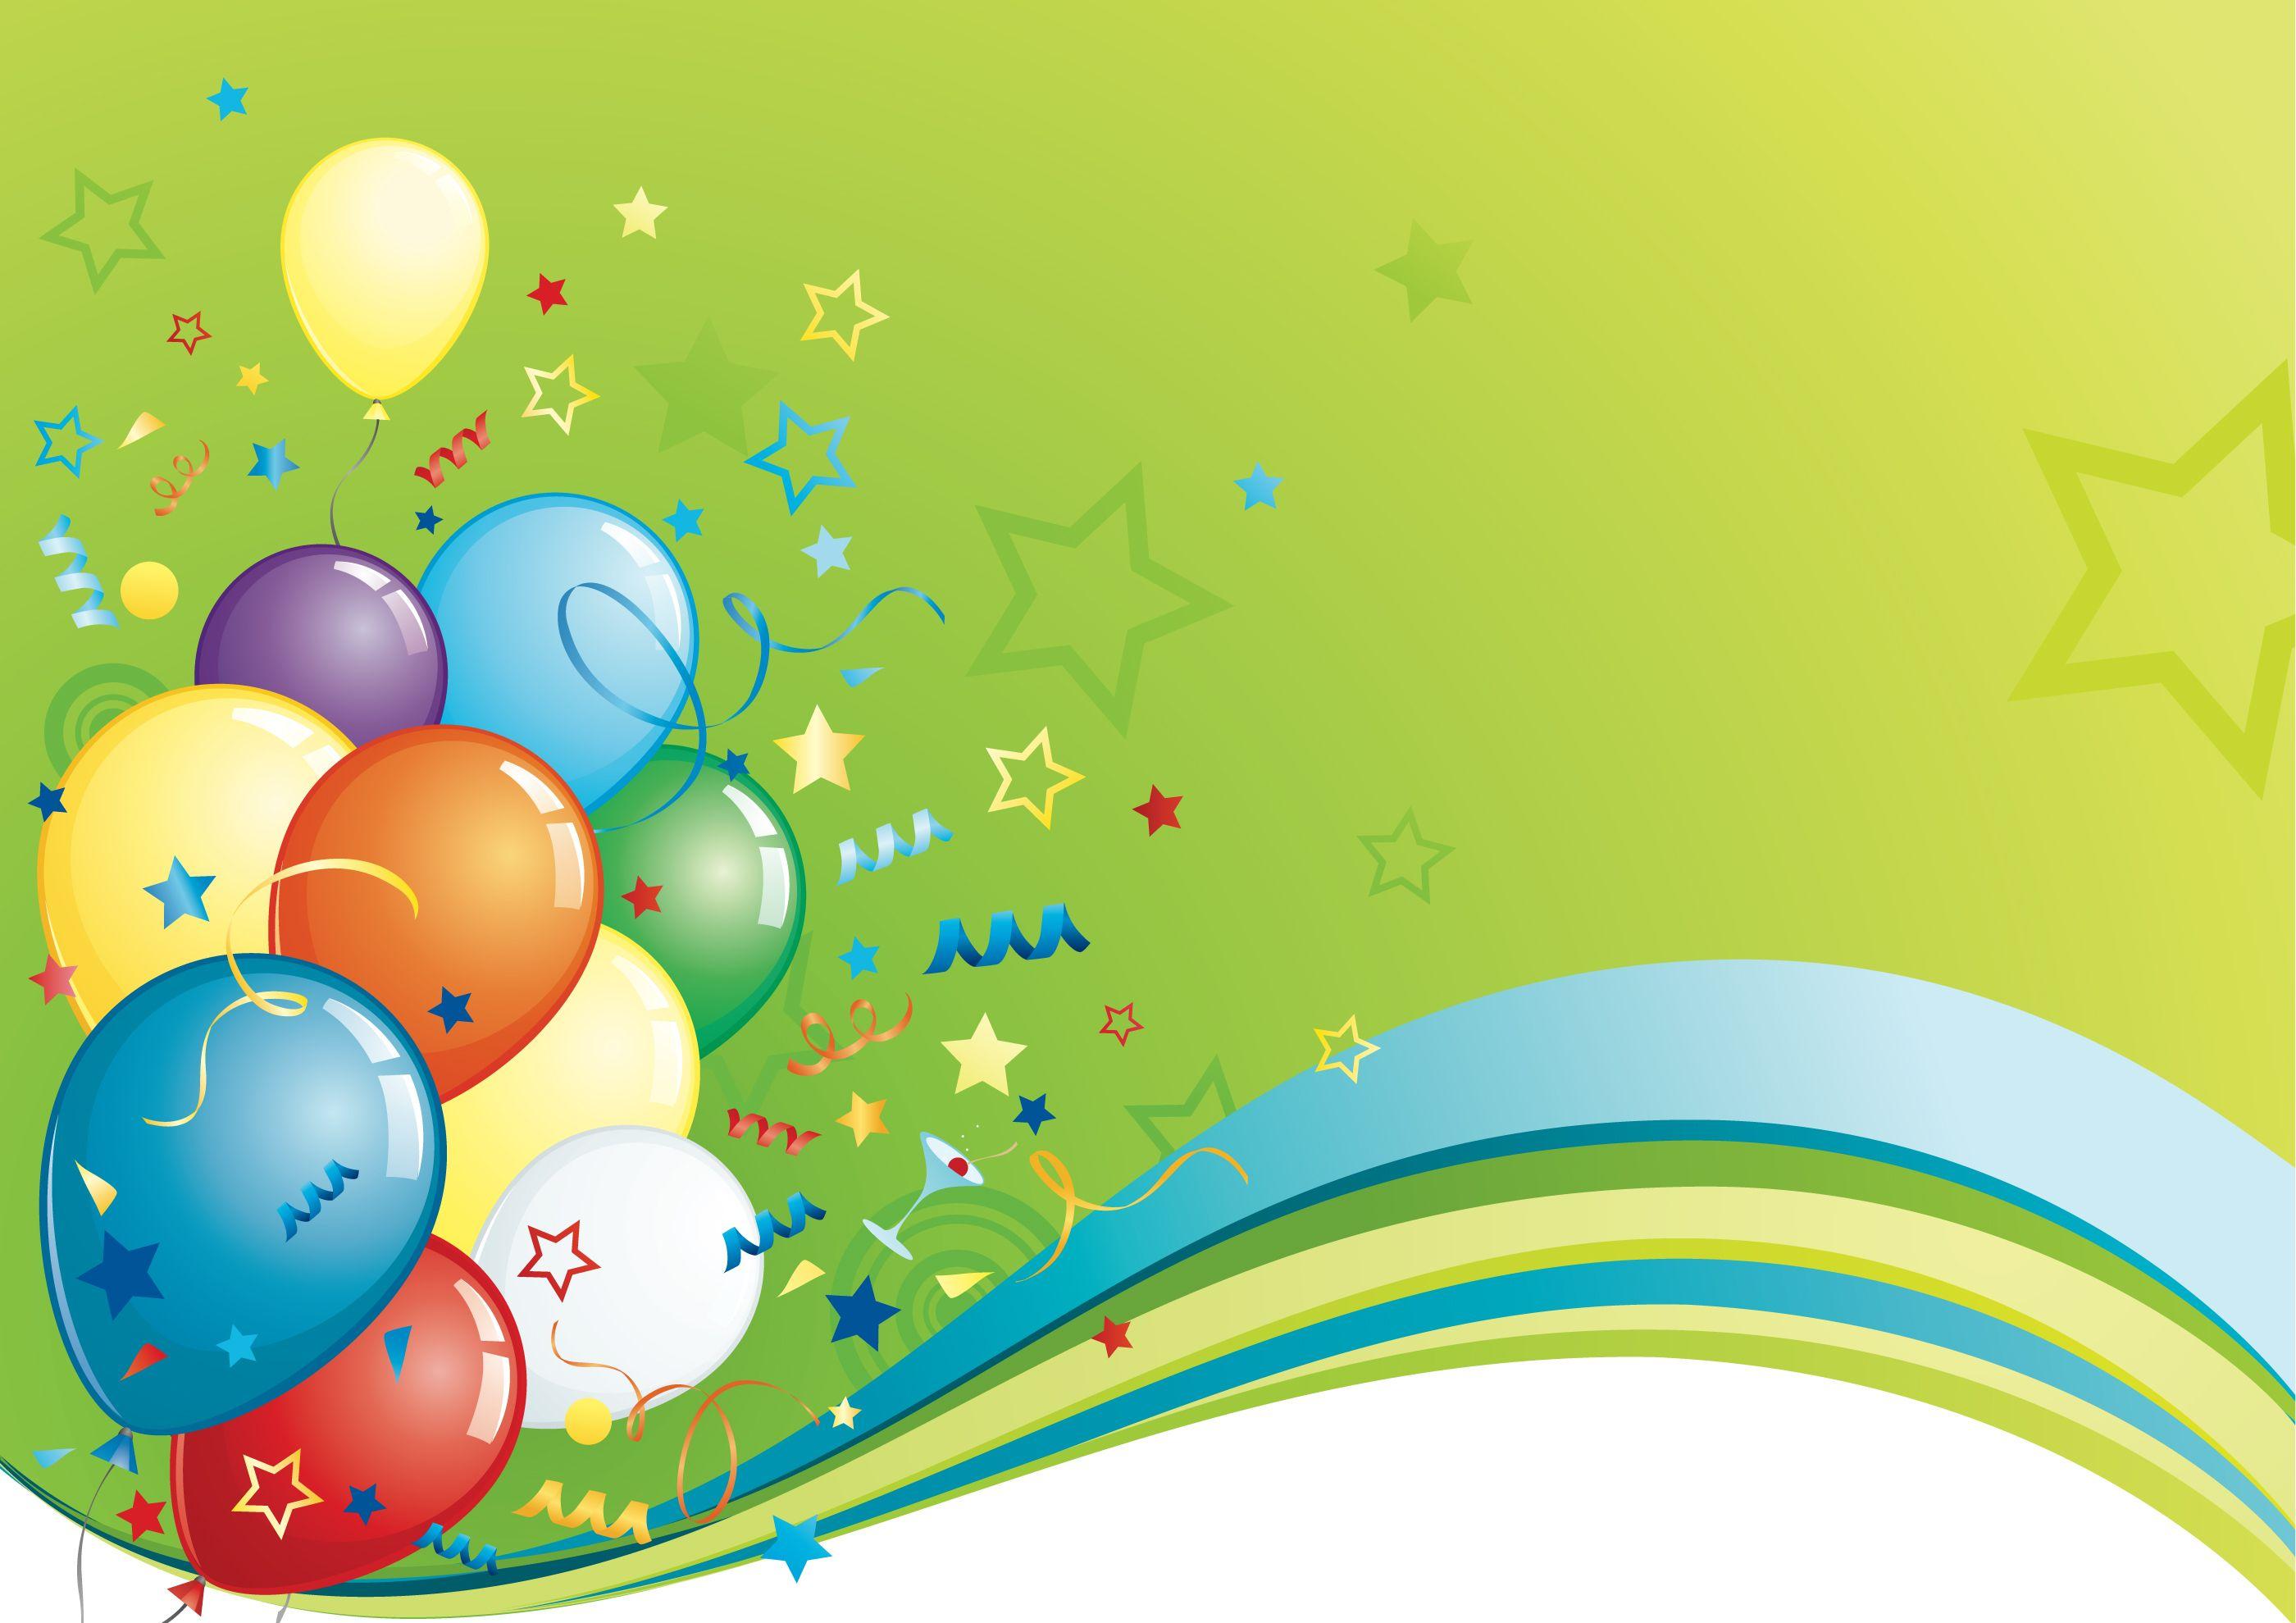 Colorful Birthday Wallpaper Free Colorful Birthday Background